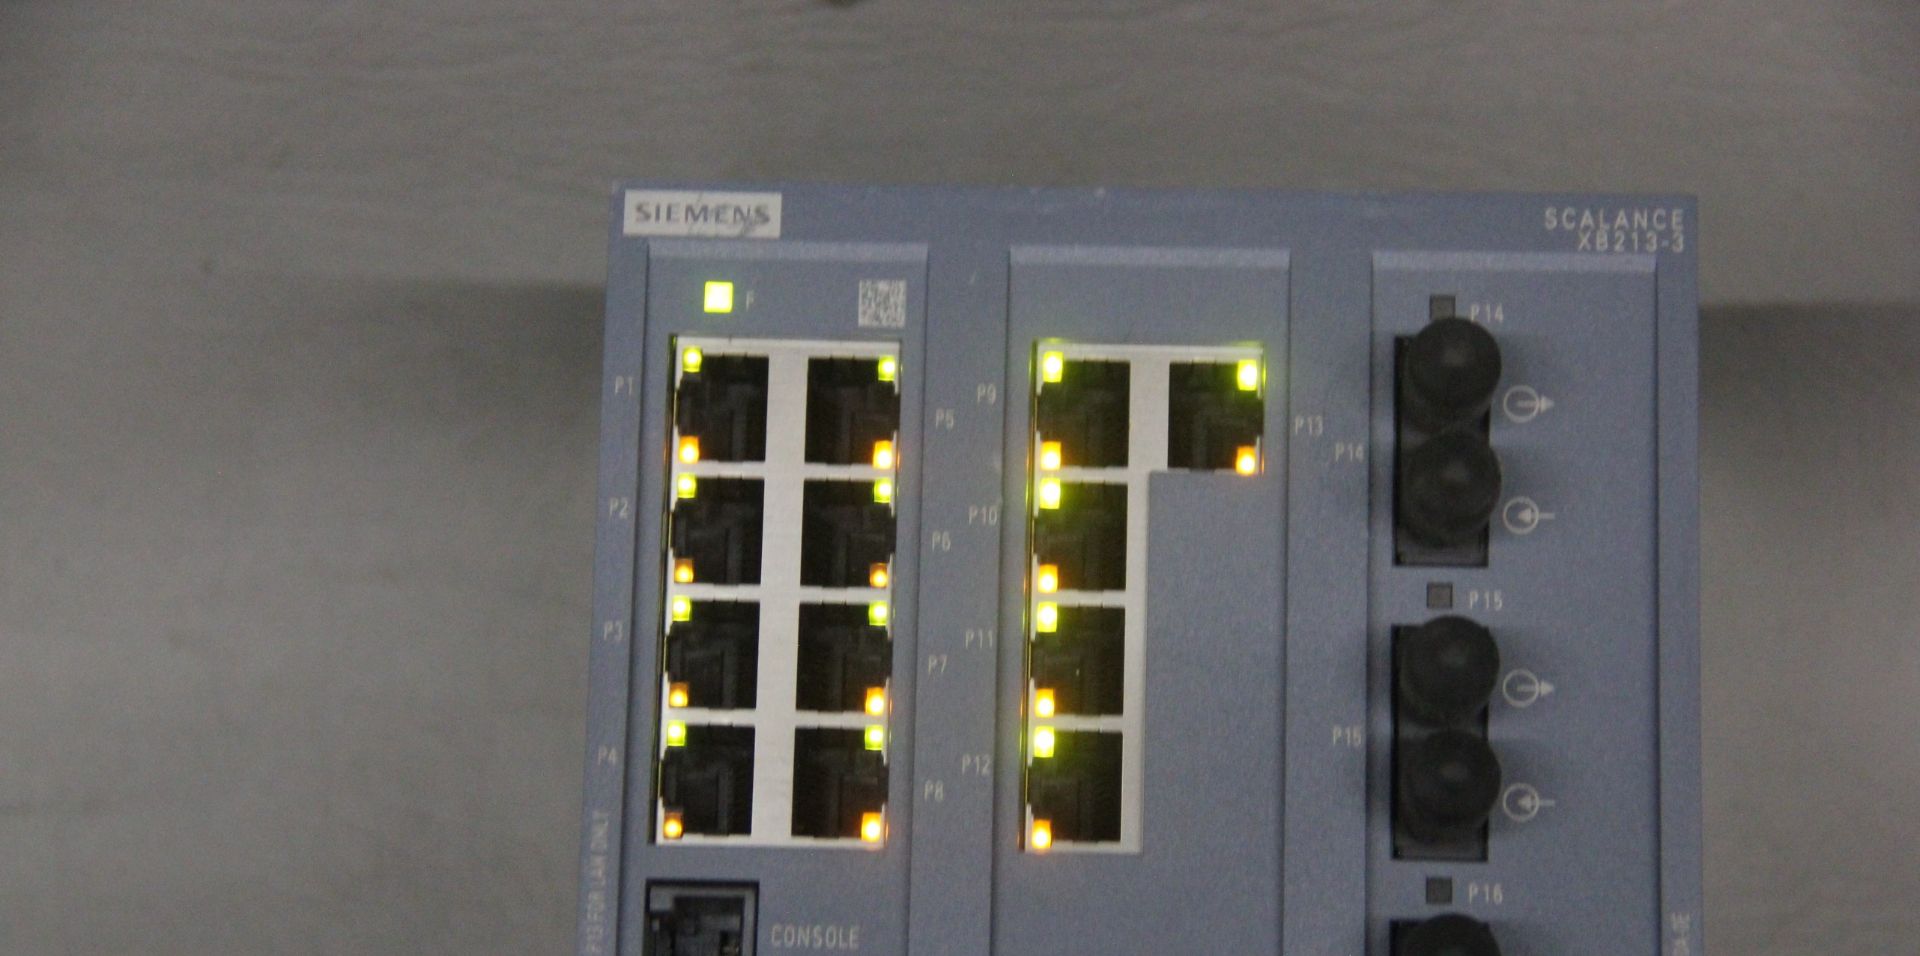 SIEMENS INDUSTRIAL ETHERNET SWITCH - Image 4 of 4